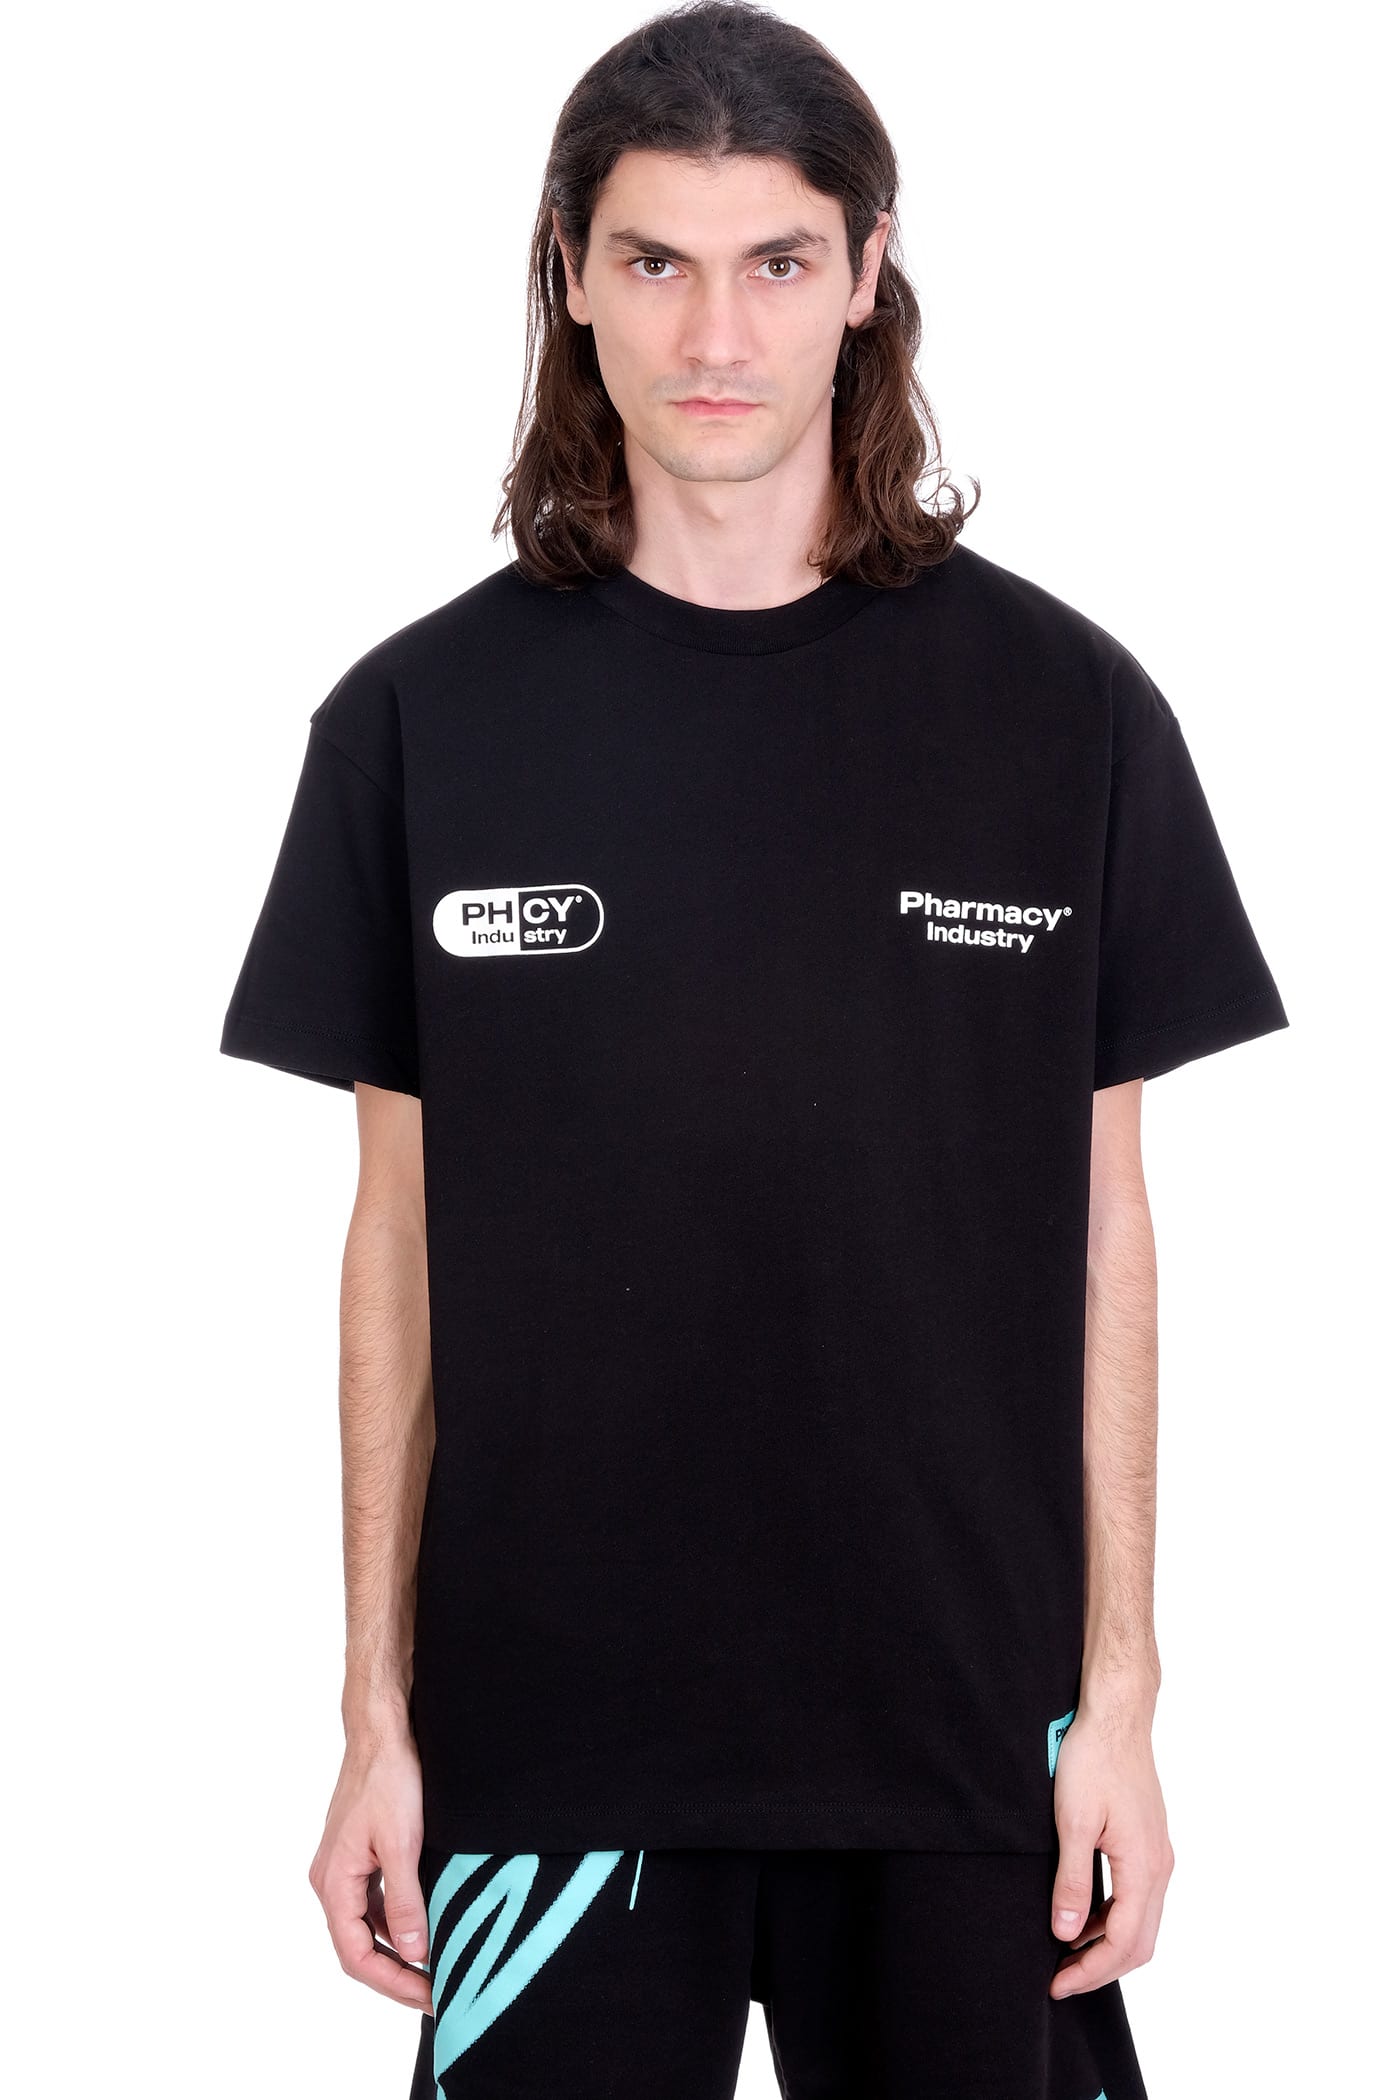 Pharmacy Industry T-shirt In Black Cotton